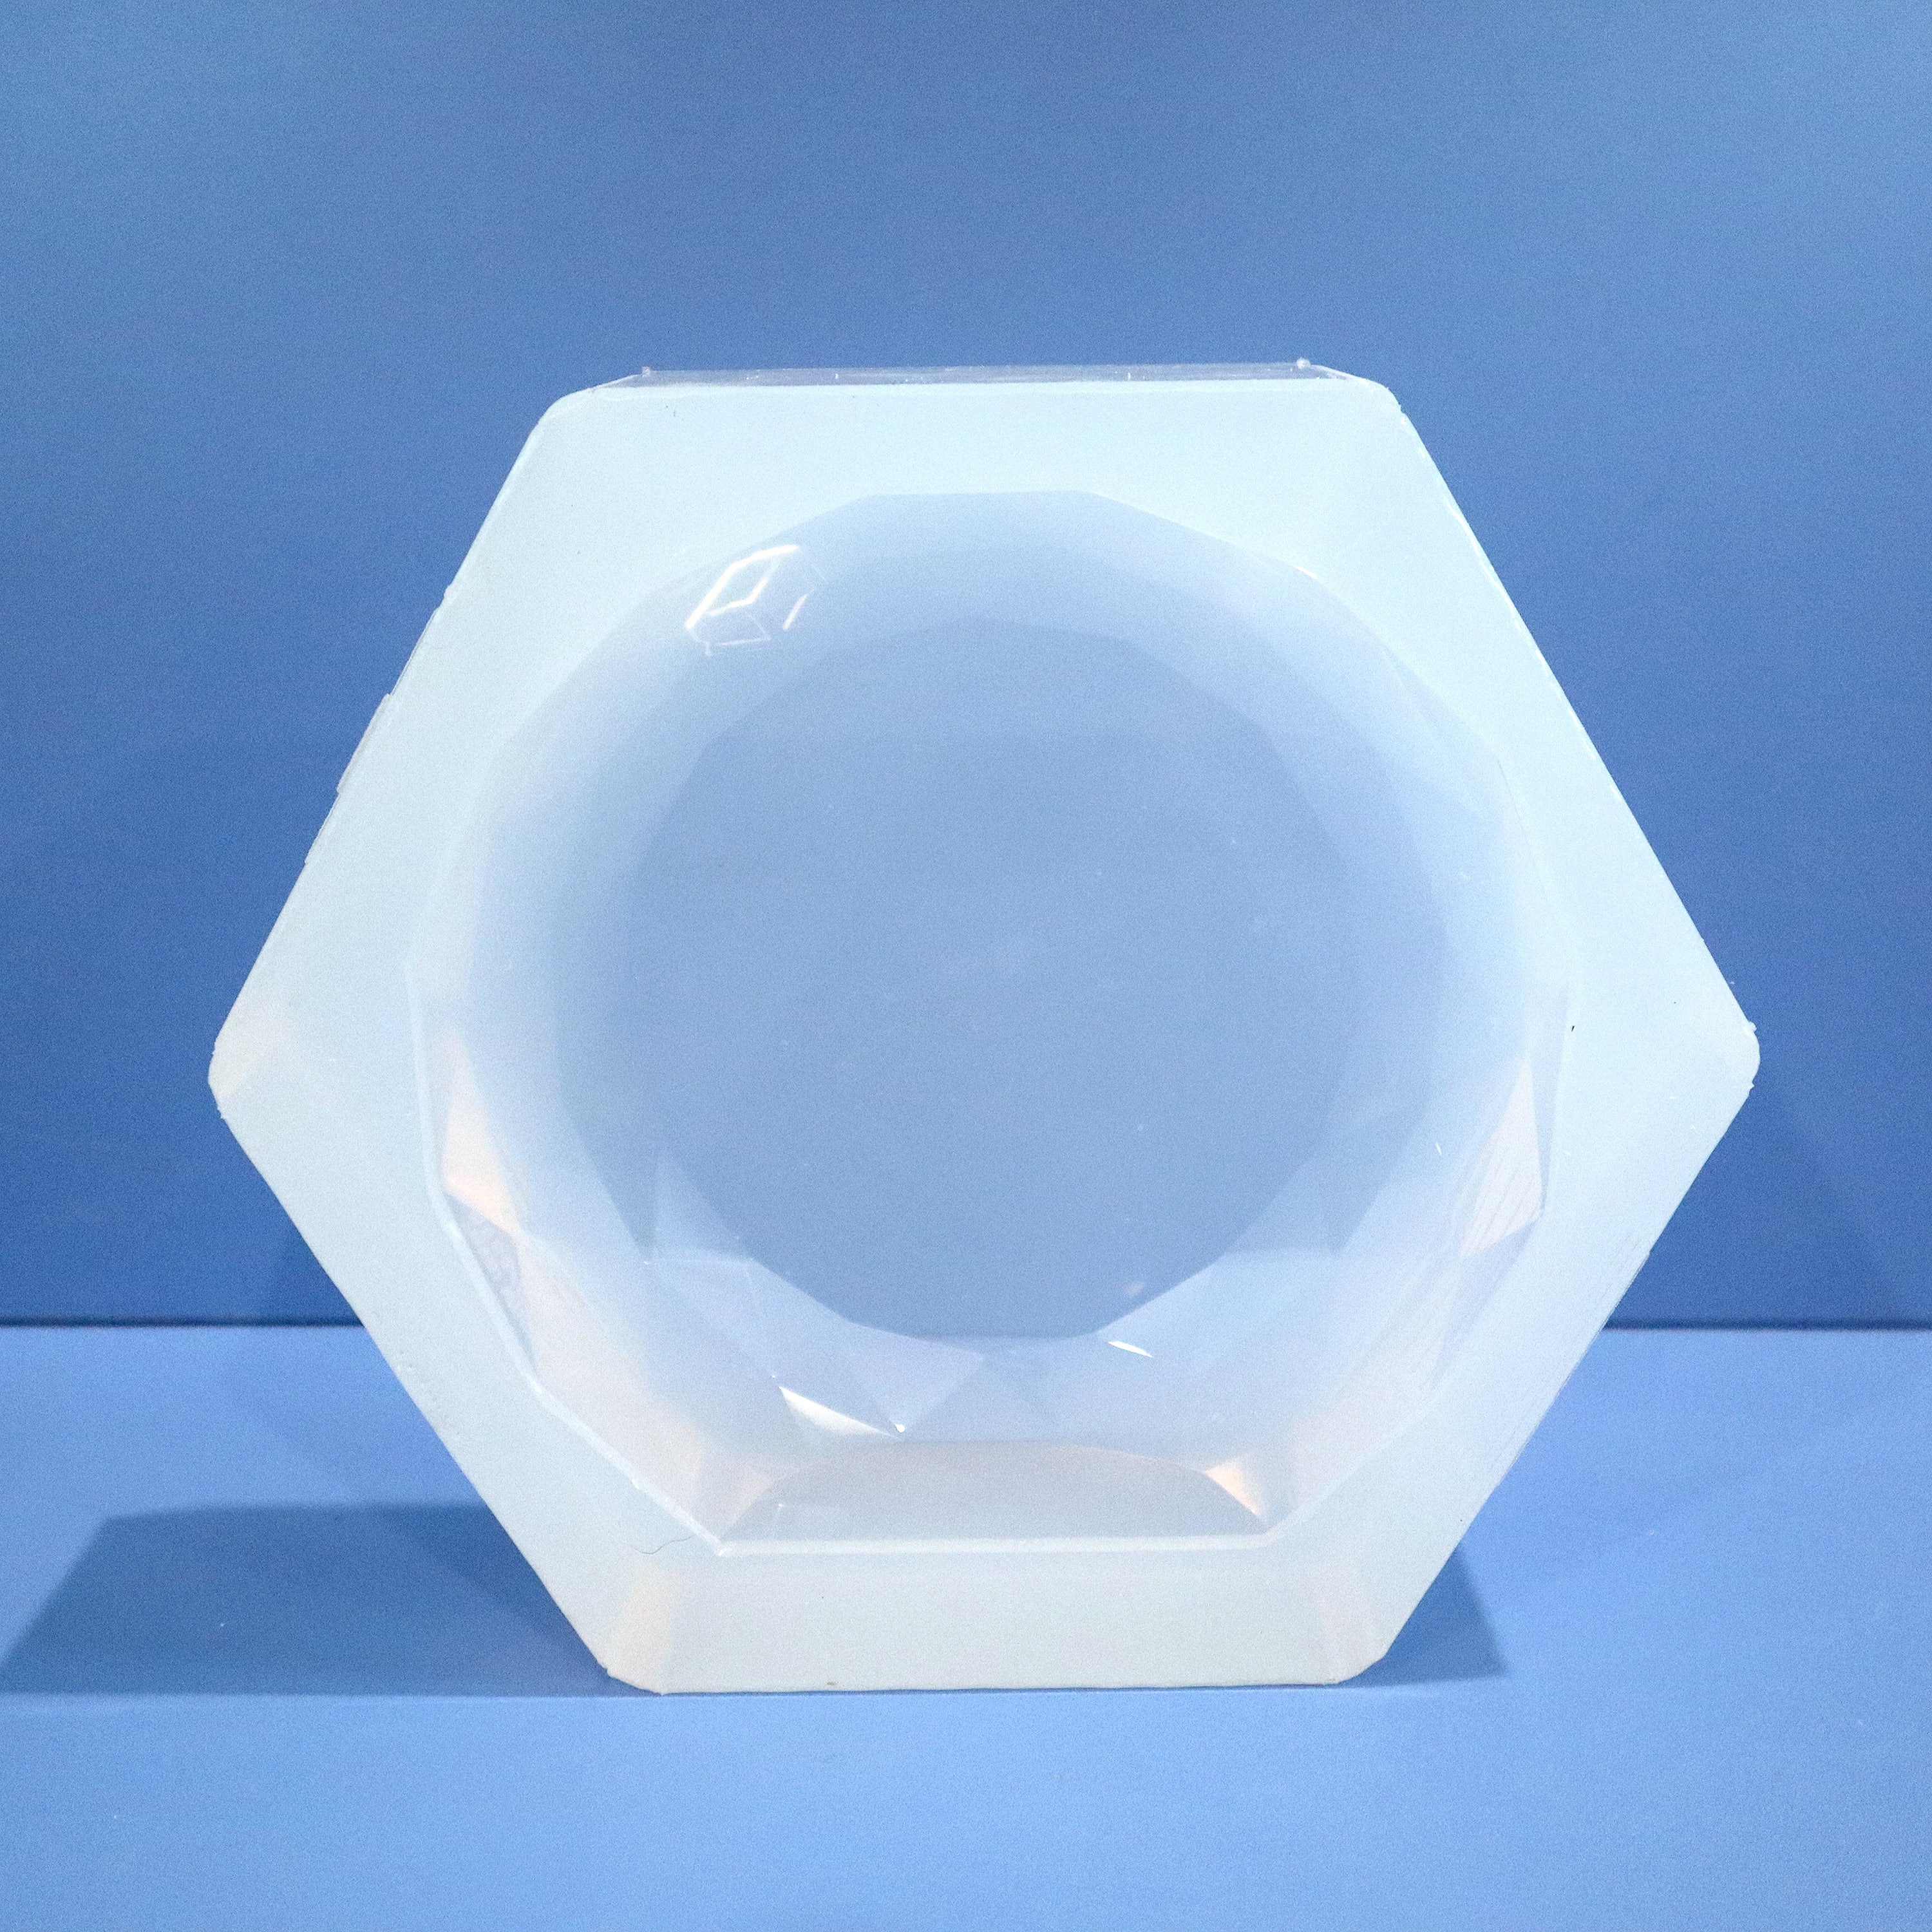 6" Faceted Standing Round Mold